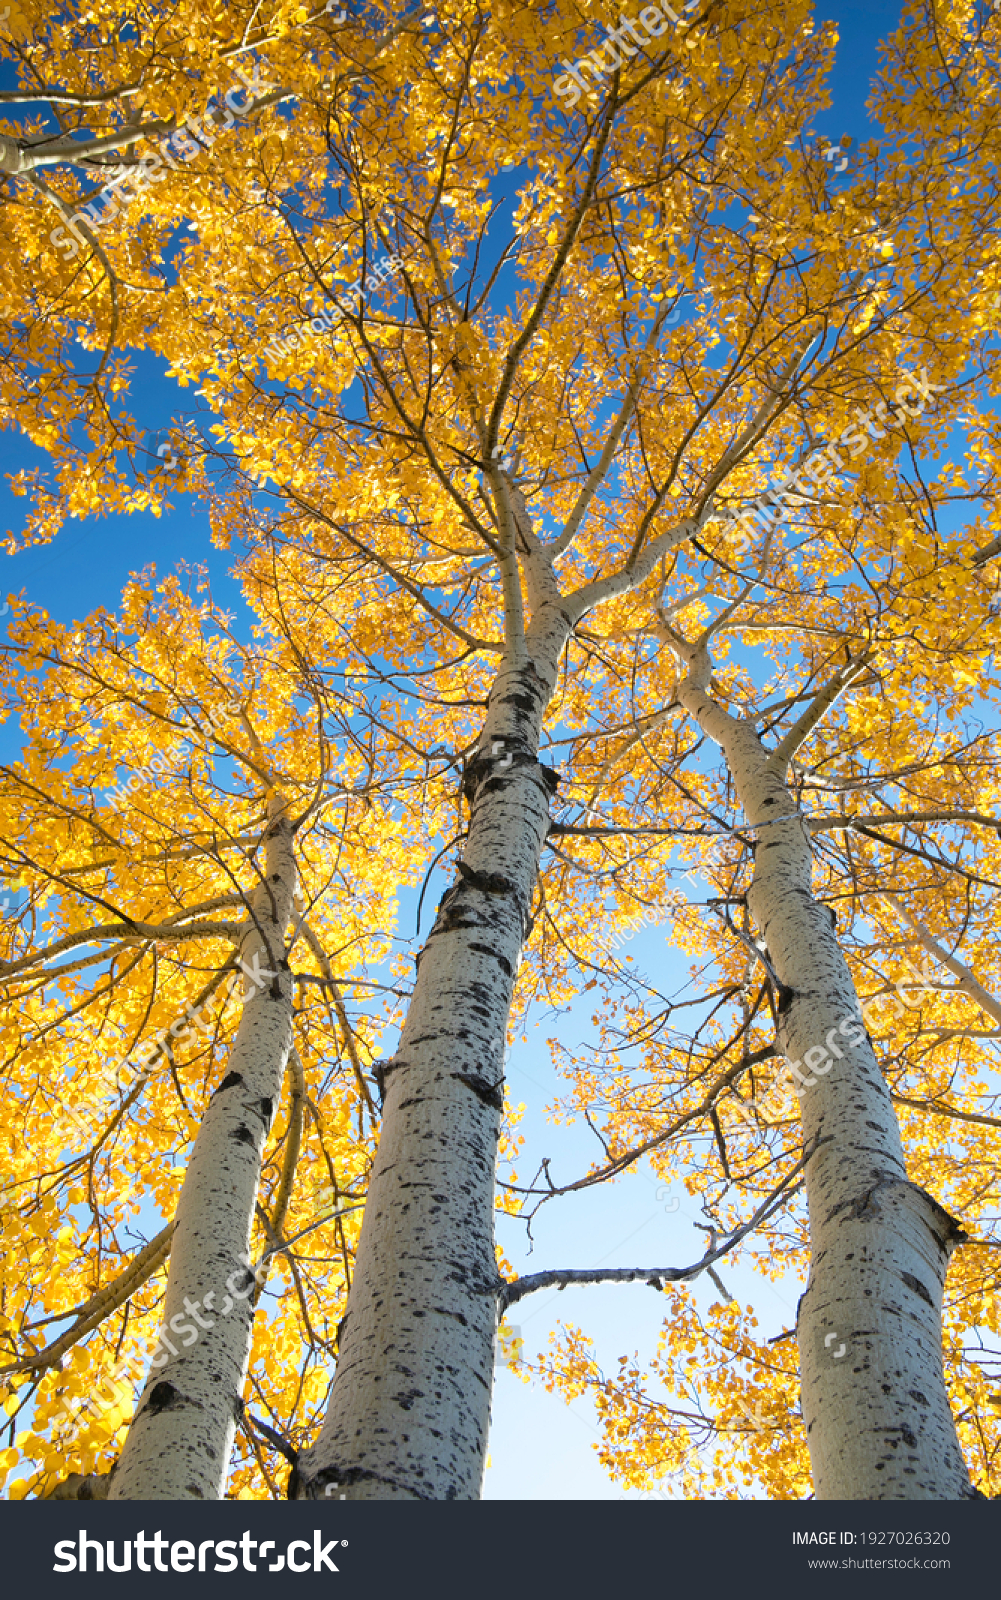 Looking up at aspen trees durning the autumn season when the leaves change colour from green t bright vibrant orange and yellow as the season comes to an end on a beautiful sunny blue sky day.  #1927026320